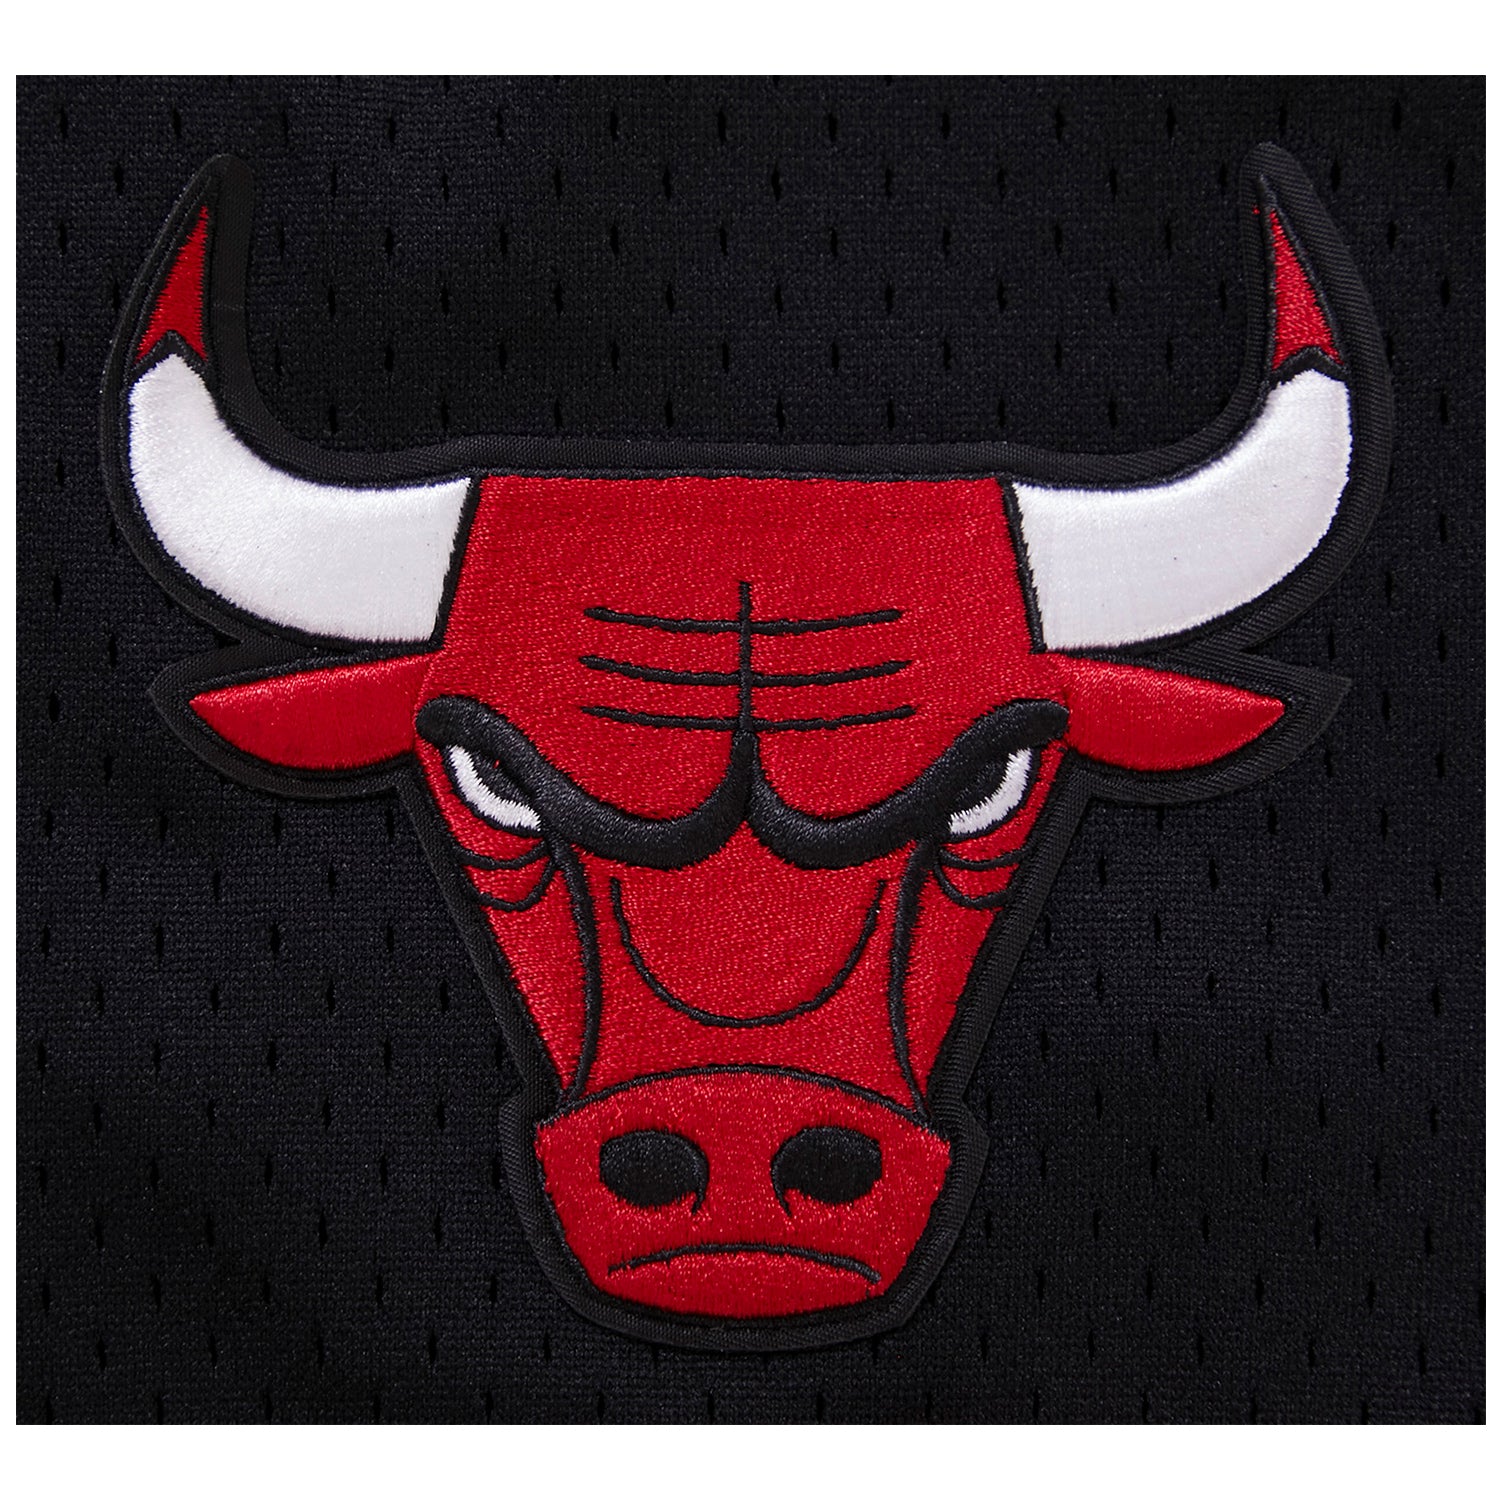 Camiseta Chicago Bulls Pure Shooter Mesh Button Front